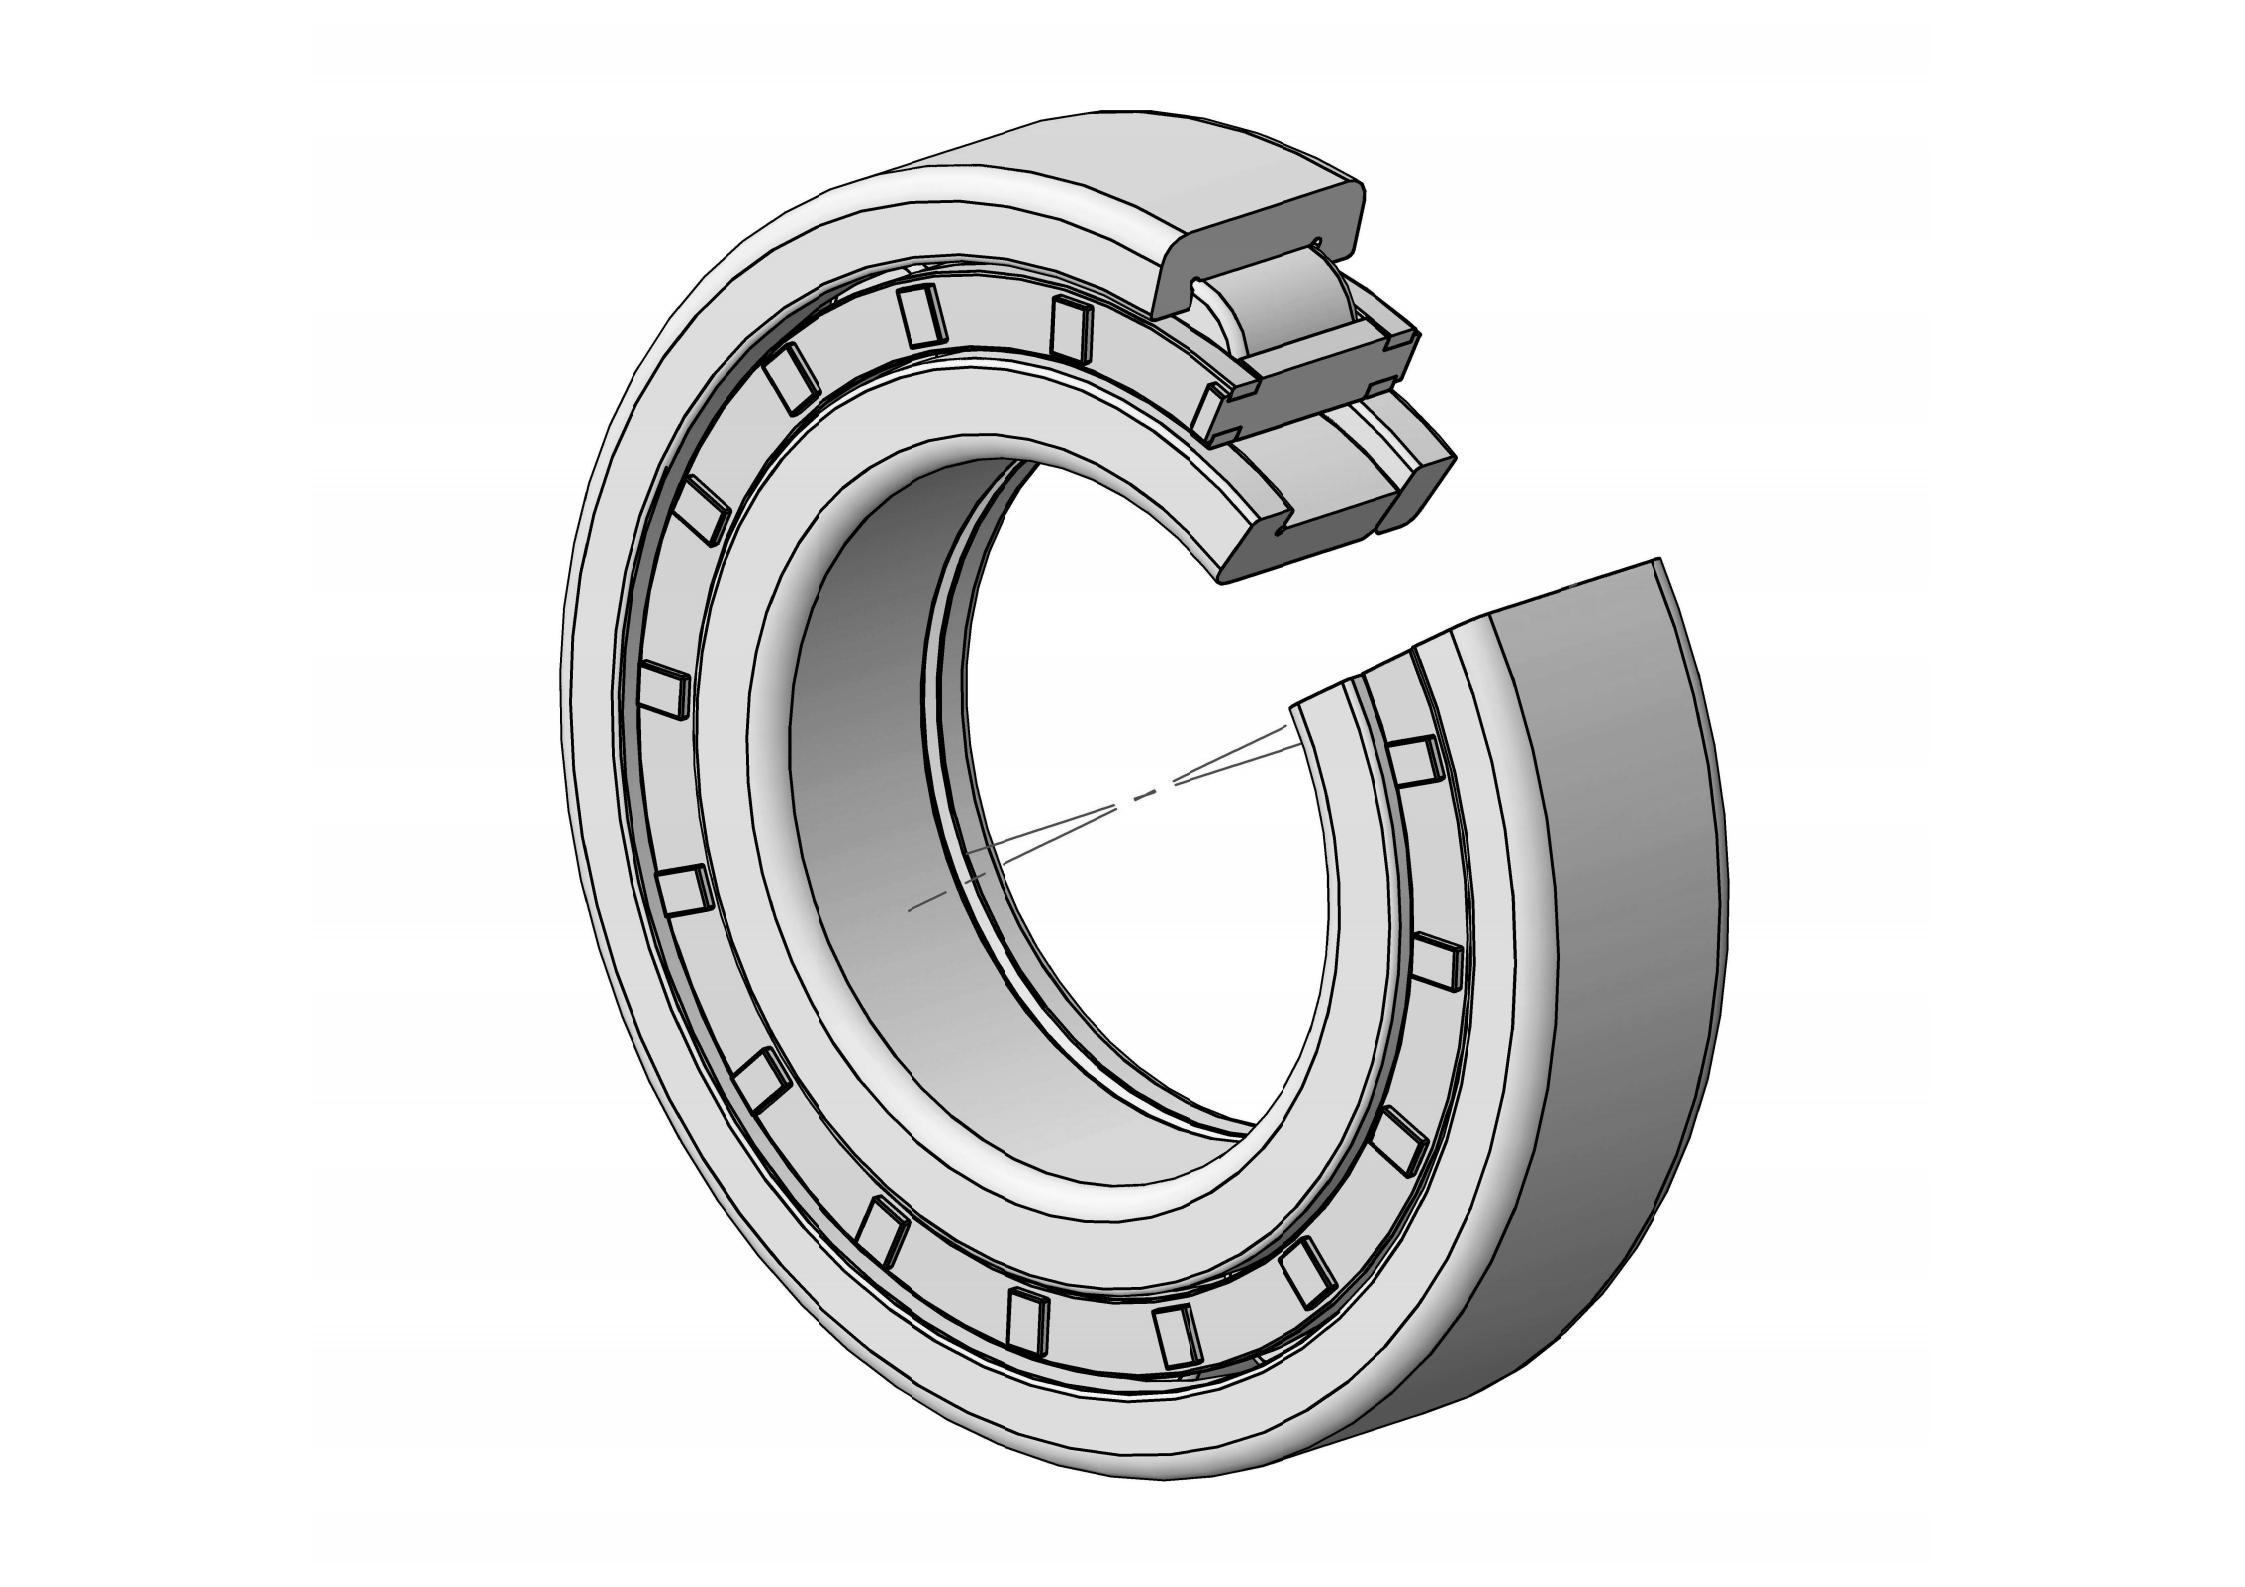 NUP2324-EM Single Row Cylindrical roller bearing 